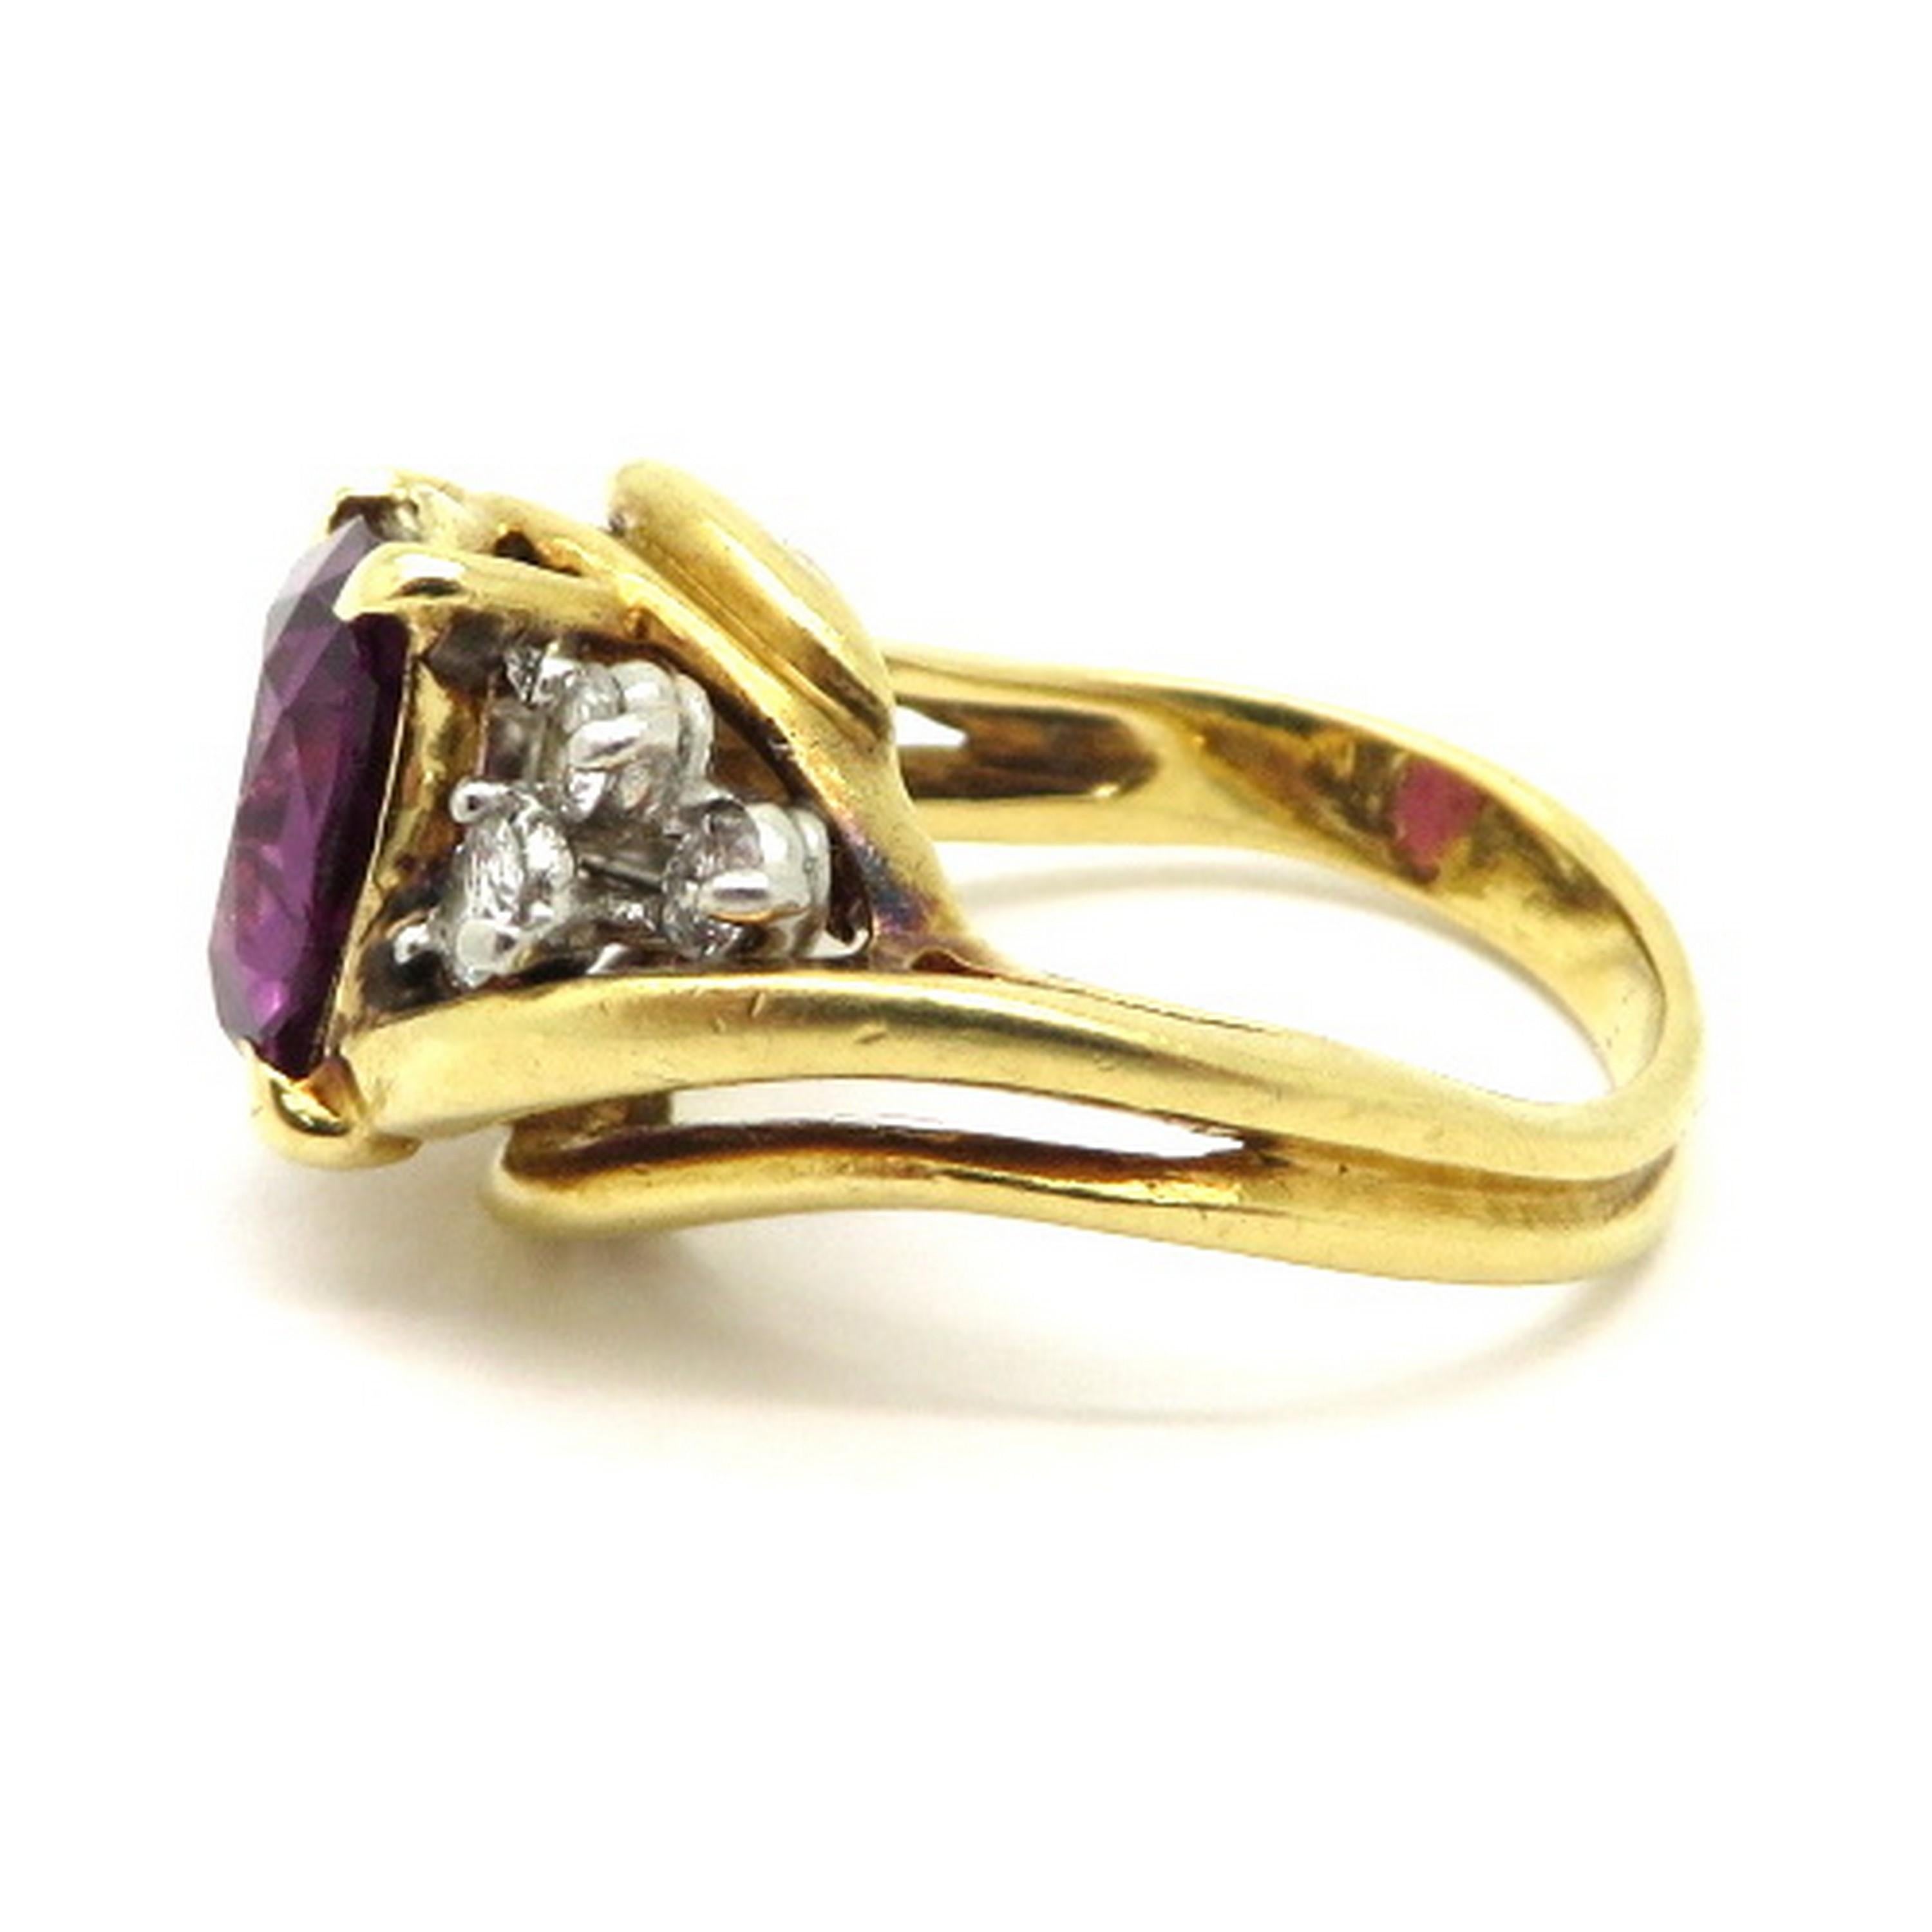 Estate designer Cartier GIA certified purple sapphire and diamond 18K yellow gold ring. Showcasing one cushion cut 2.30 carat purple sapphire. The ring includes the GIA colored stone grading report and the Cartier box. Number 3949, number 8100.